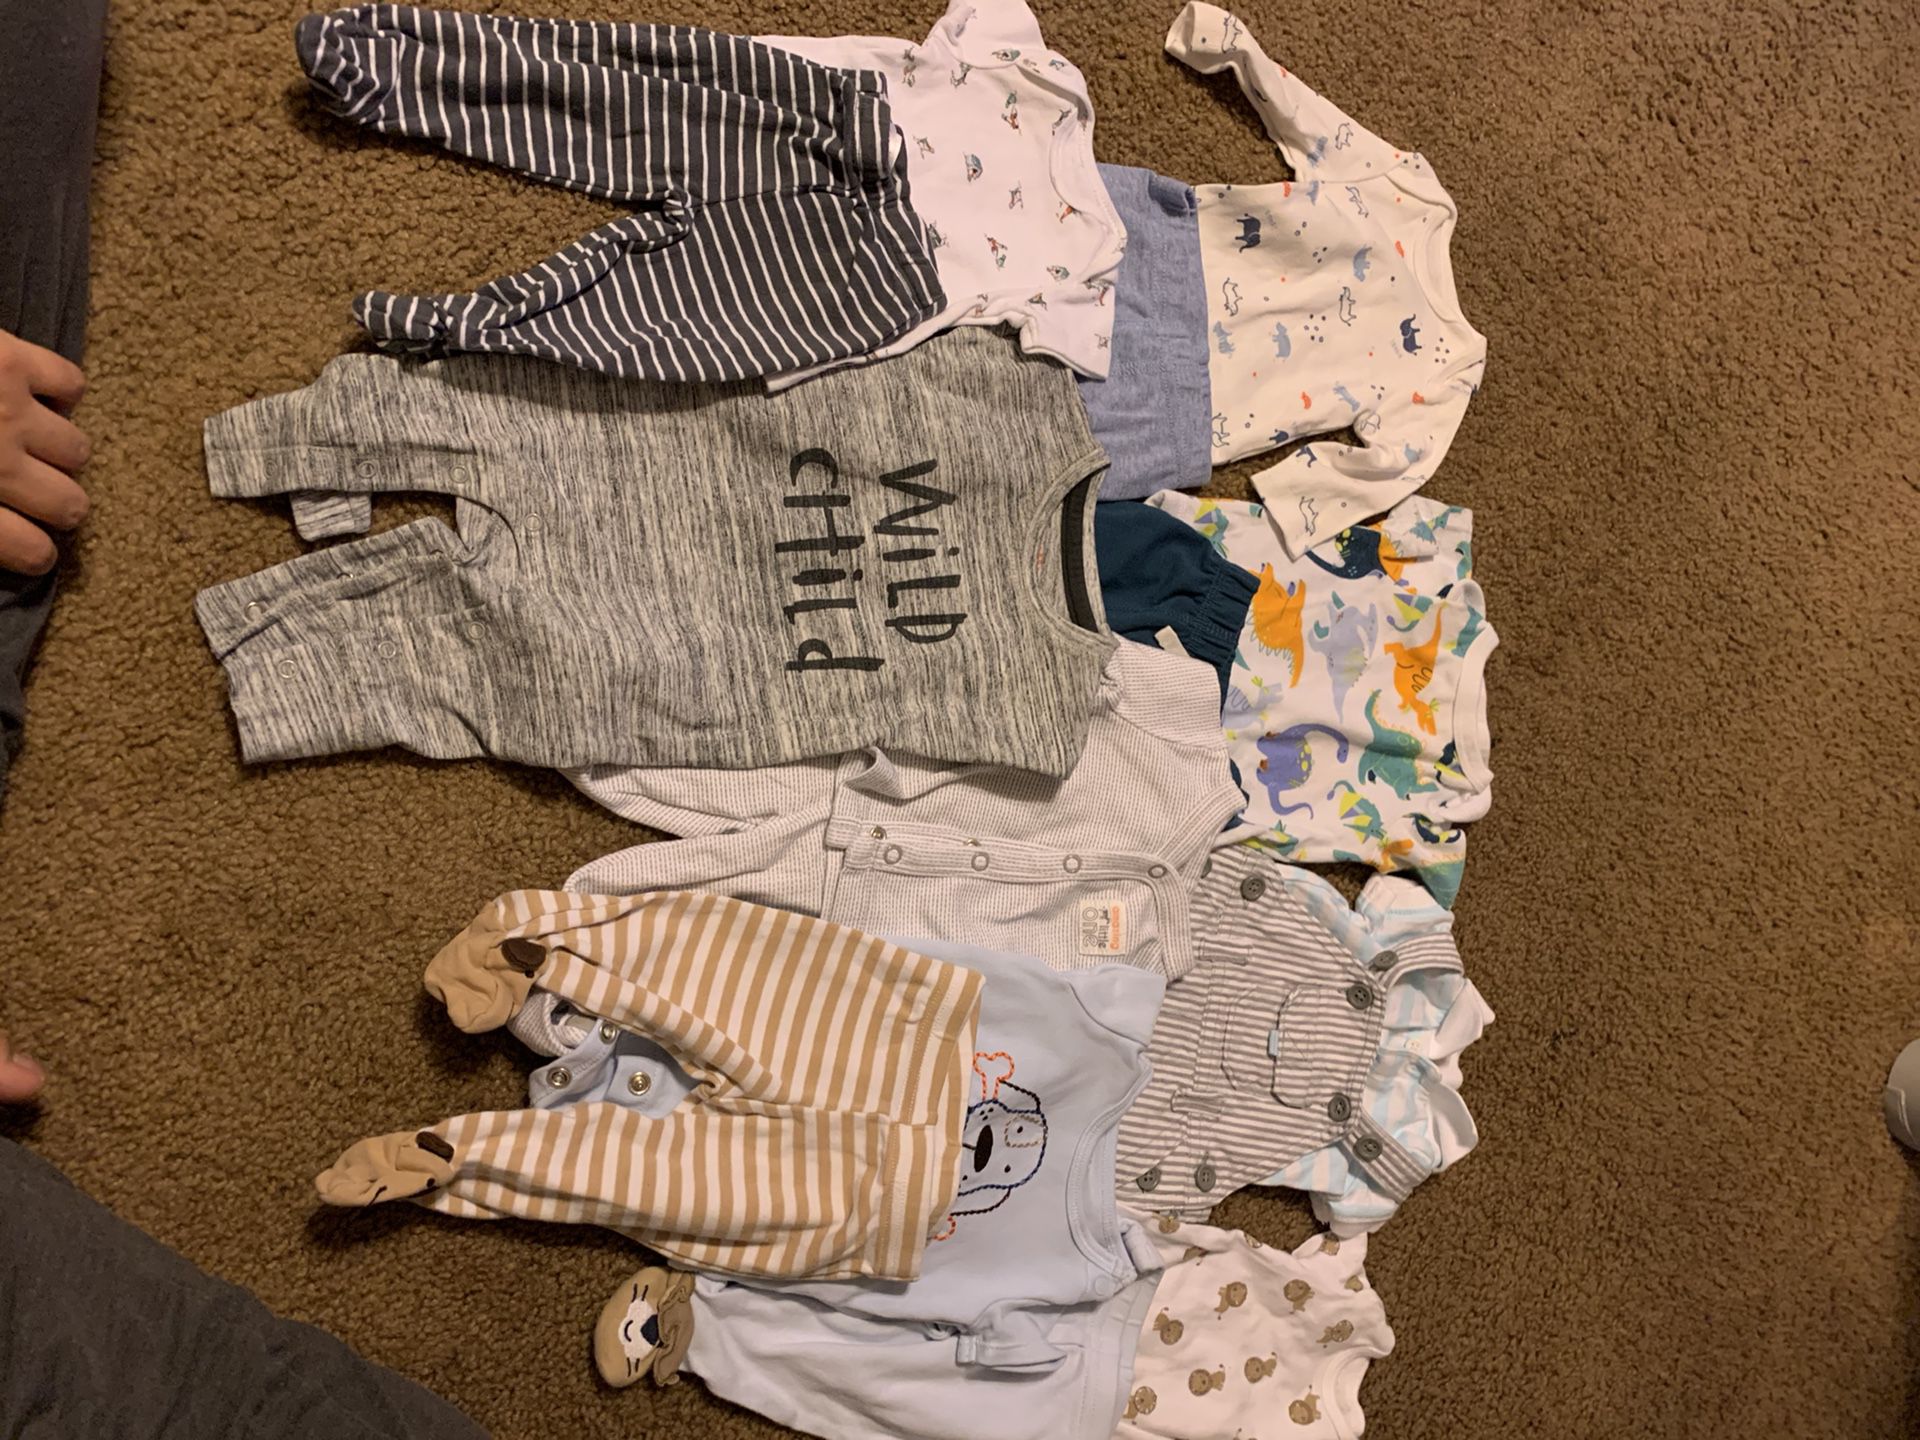 Newborn boy clothes and 27 size 1 diapers